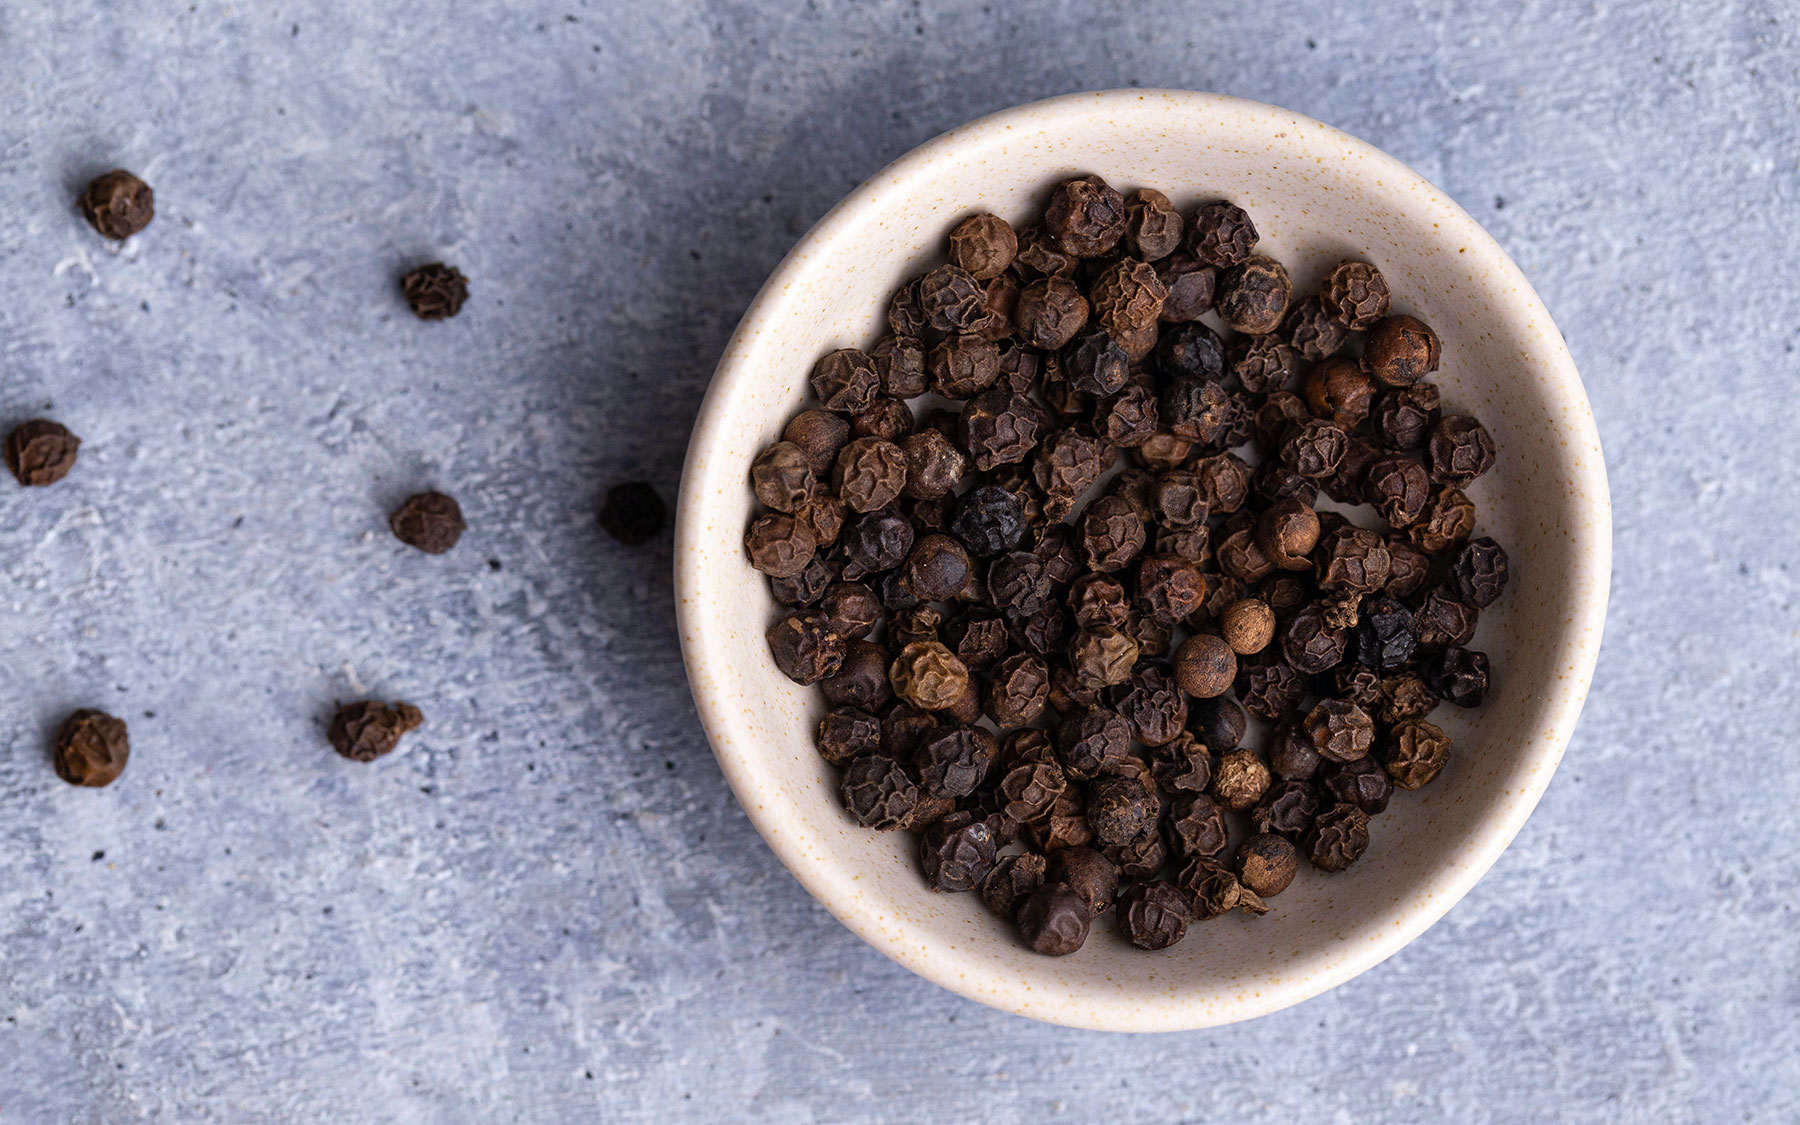 What Is Piperine Extract?